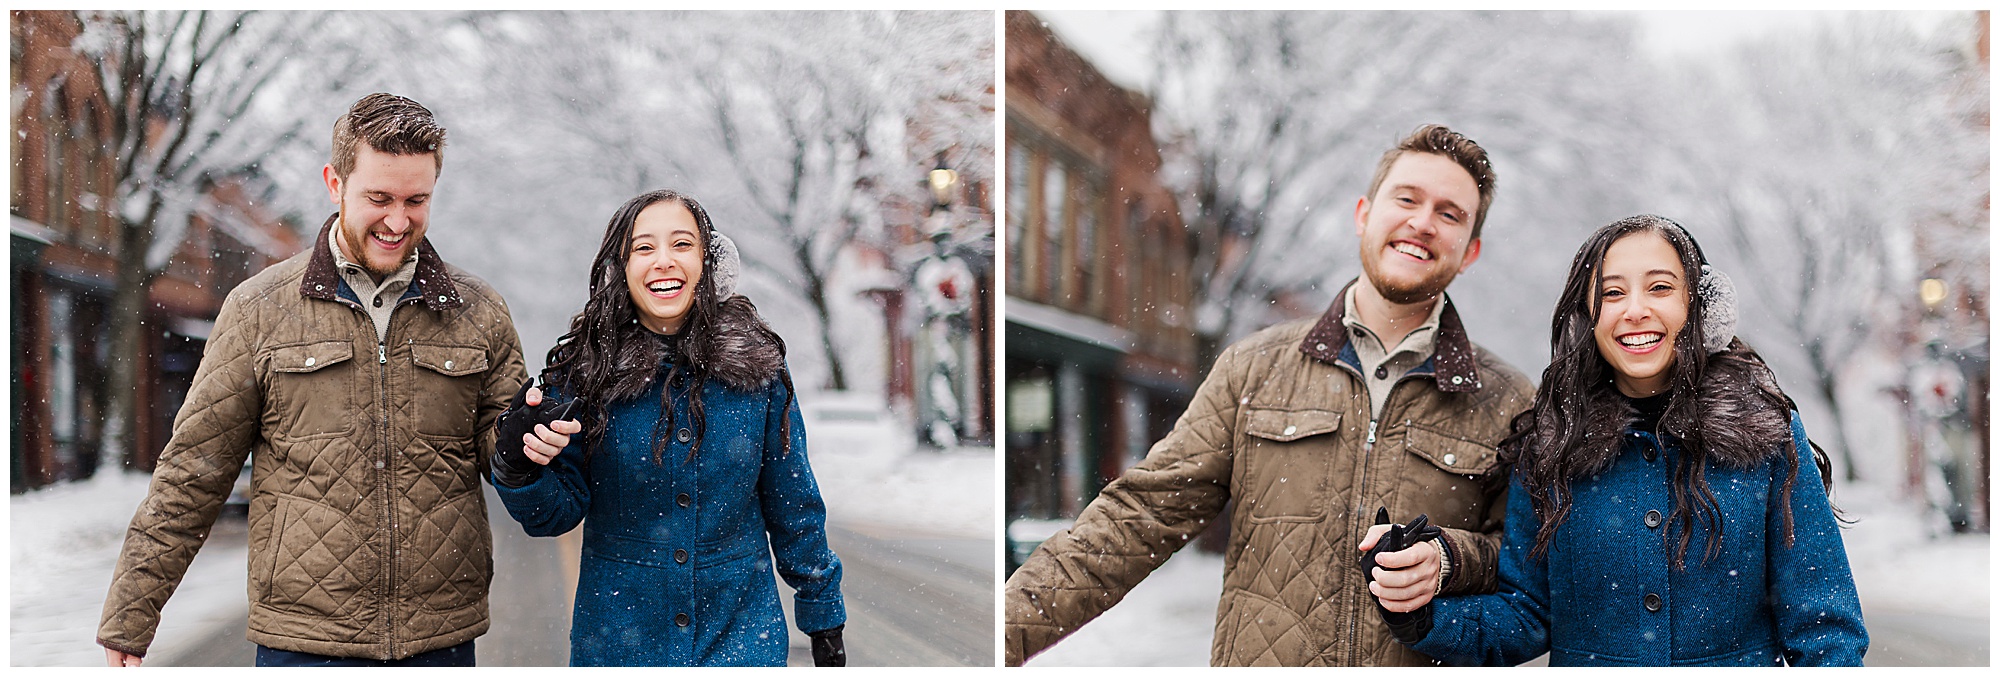 beacon engagement photography in the winter